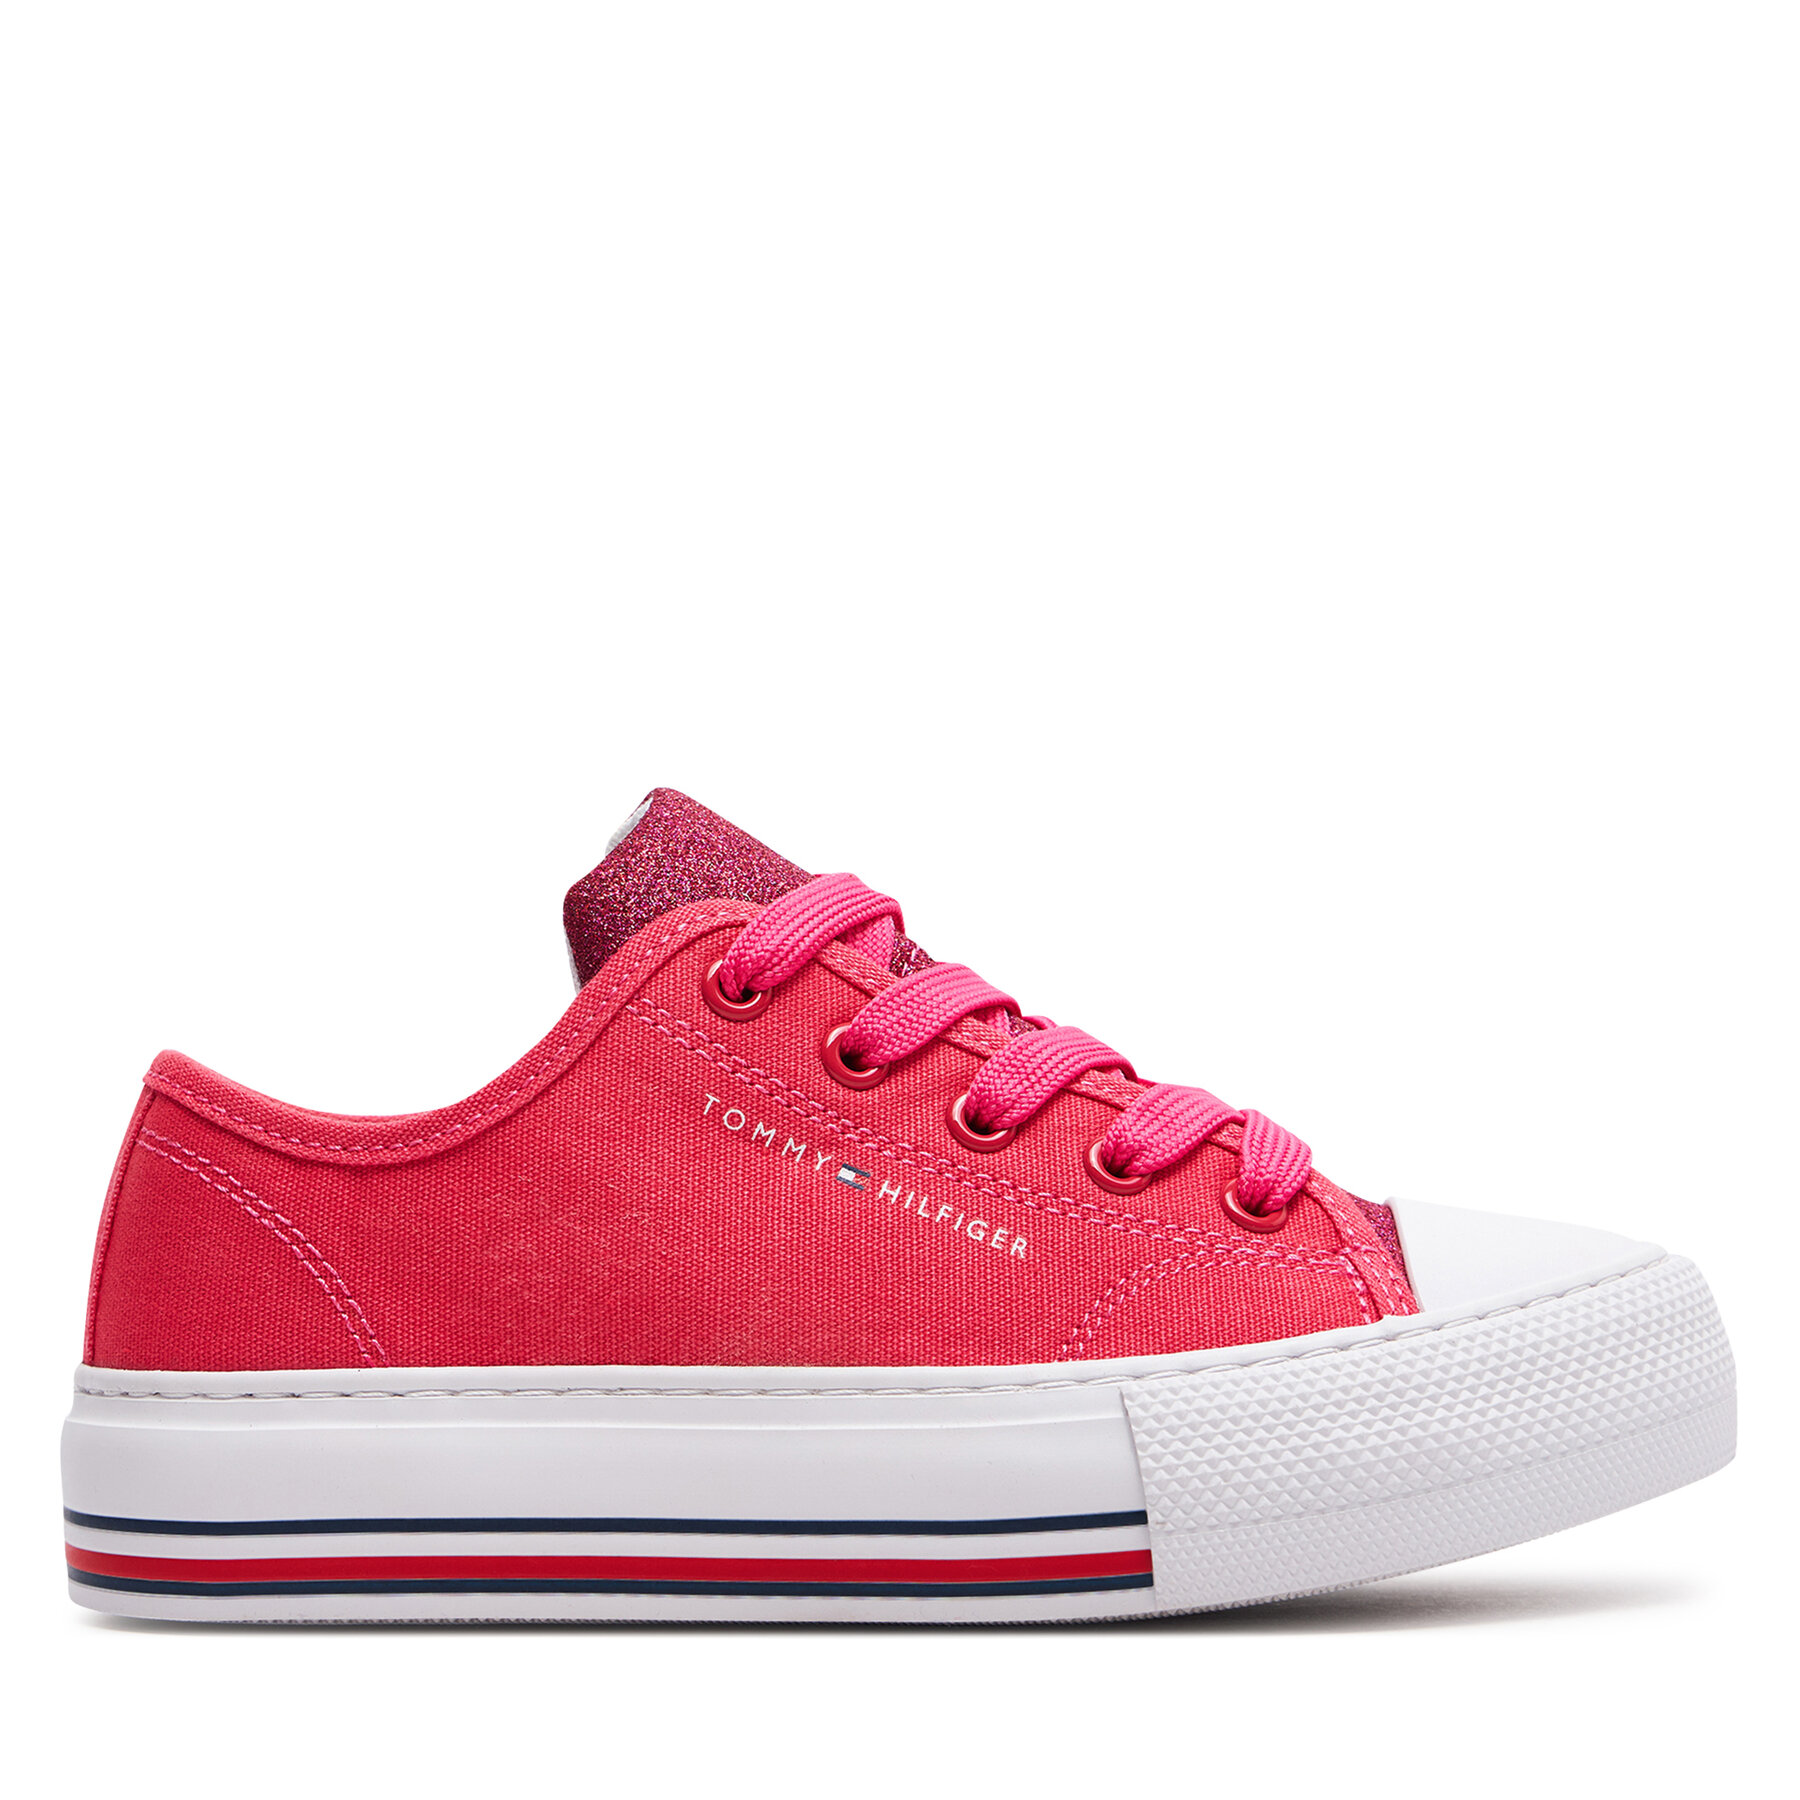 Sneakers aus Stoff Tommy Hilfiger Low Cut Lace-Up Sneaker T3A9-33185-1687 M Magenta 385 von Tommy Hilfiger